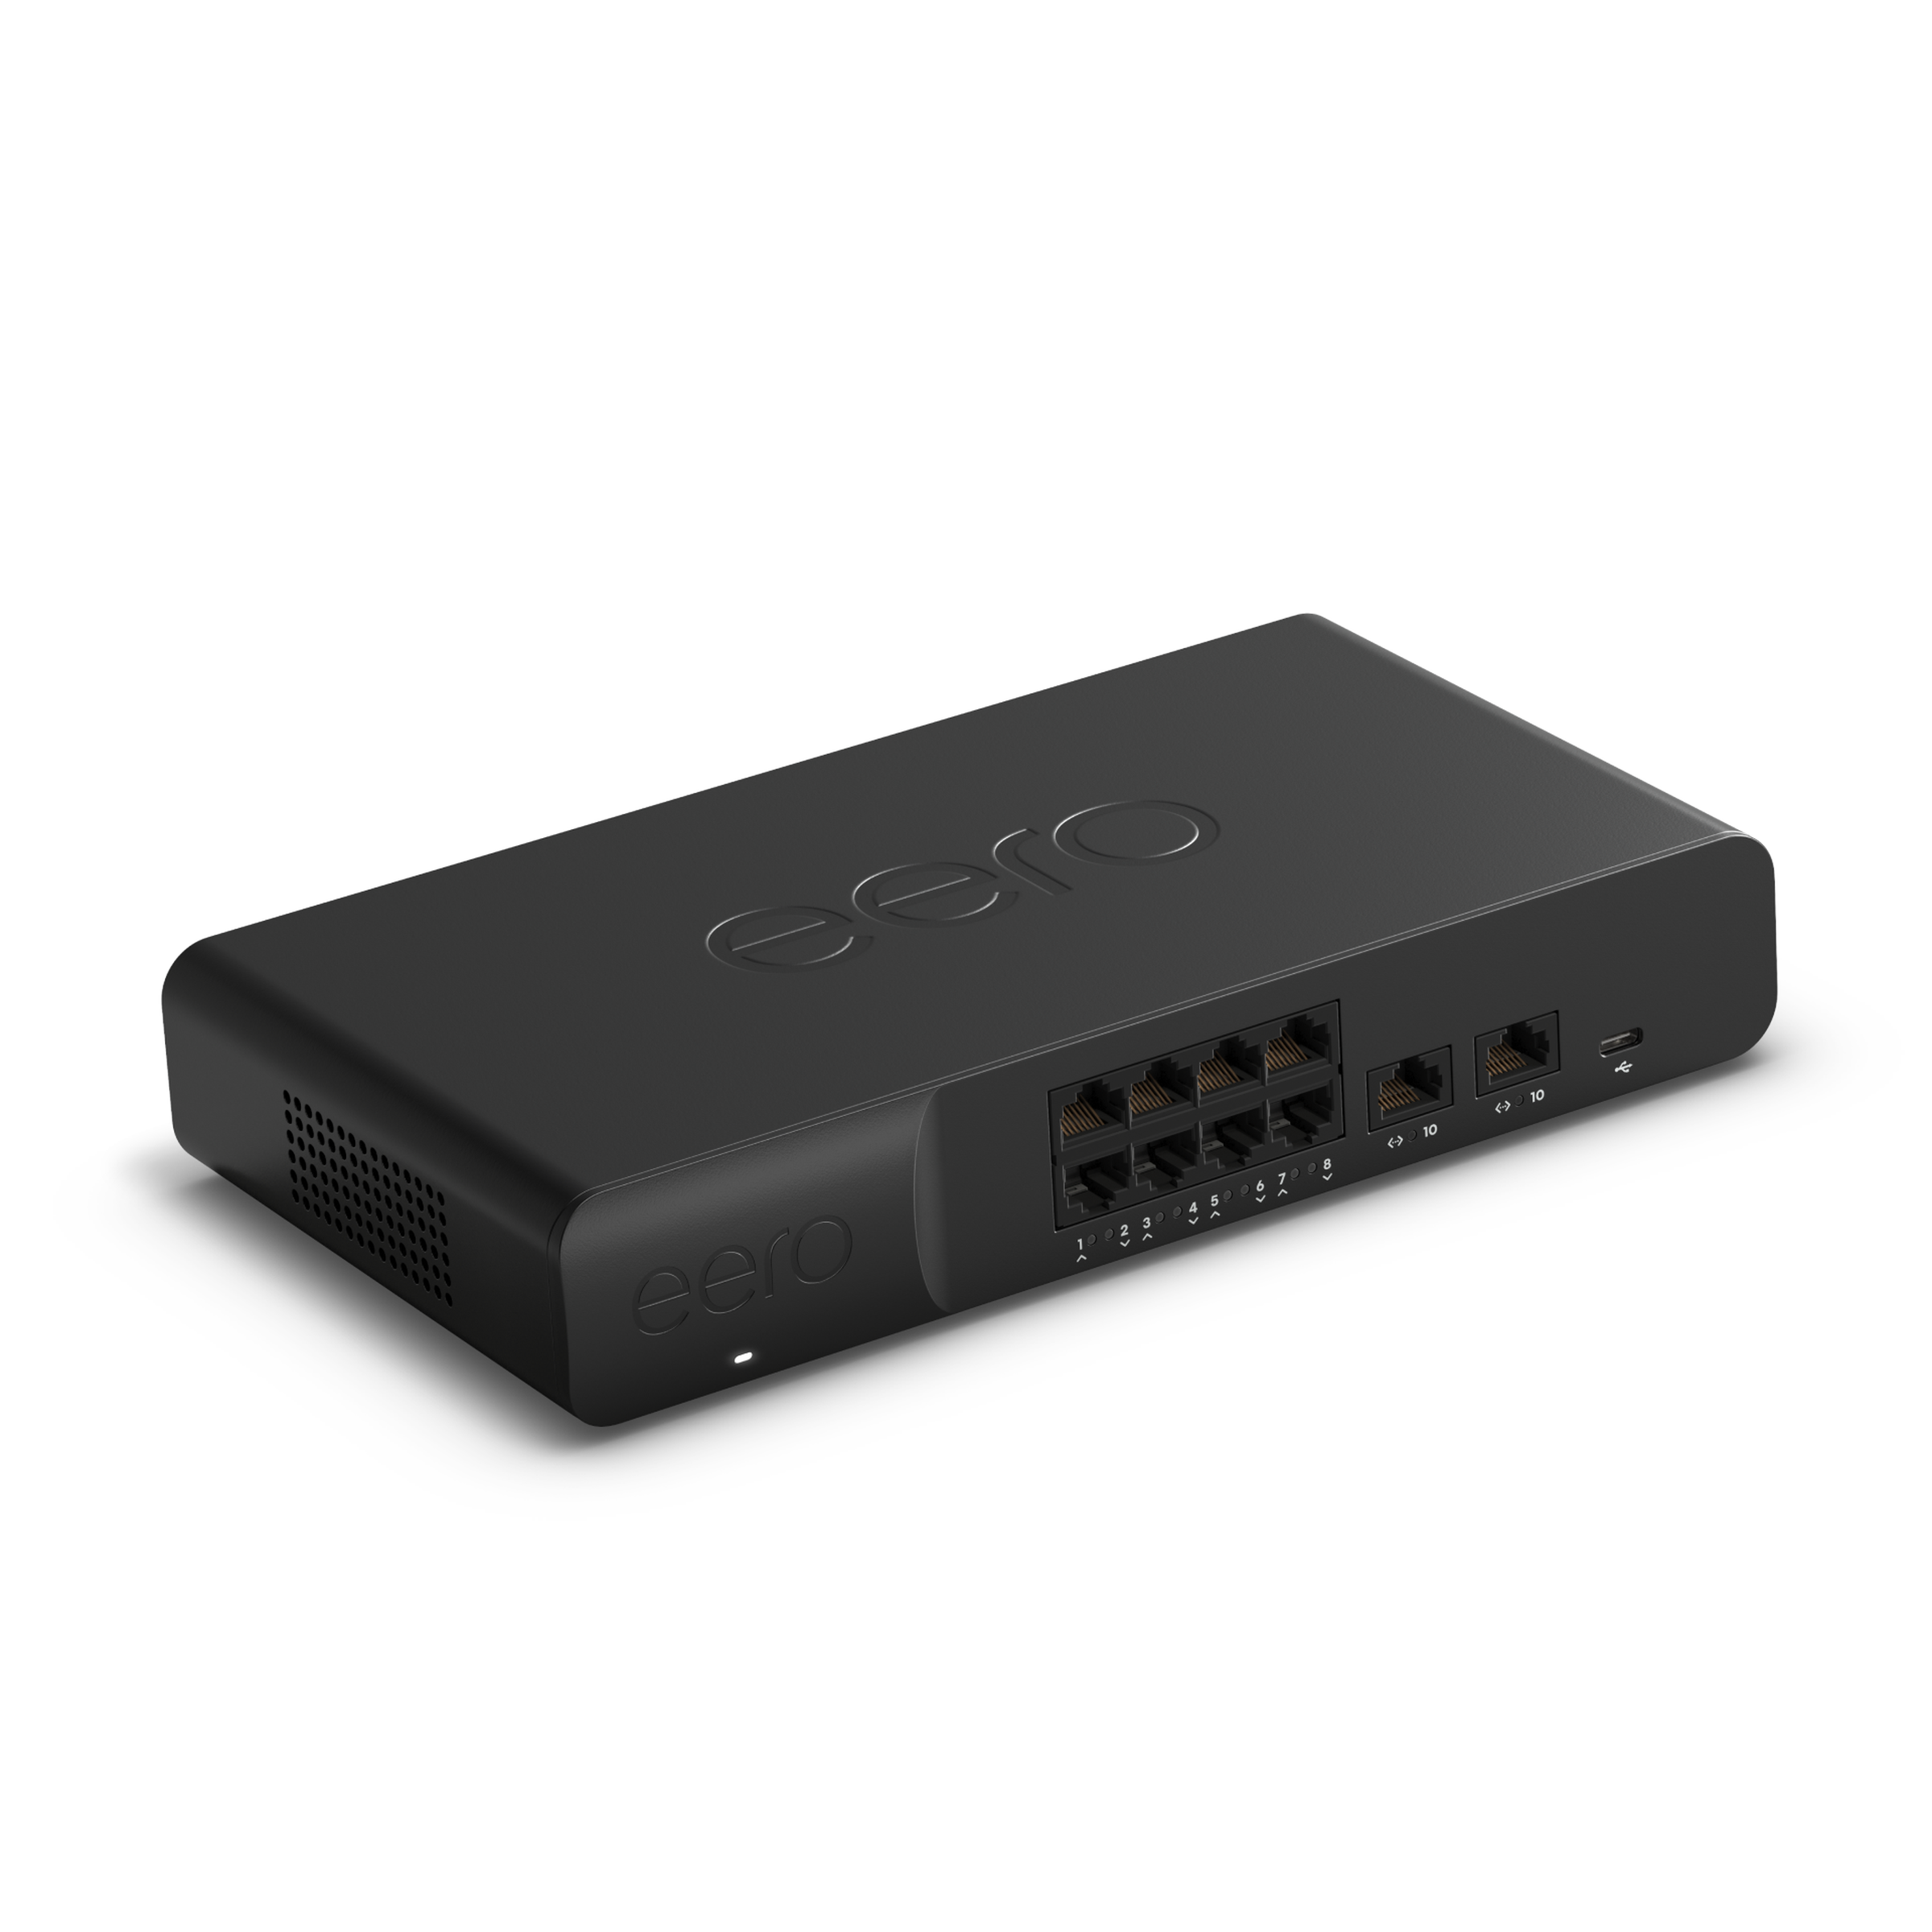 Image of the Eero PoE gateway, a black, rounded rectangular device with ten Ethernet ports and a USB-C port on the front.